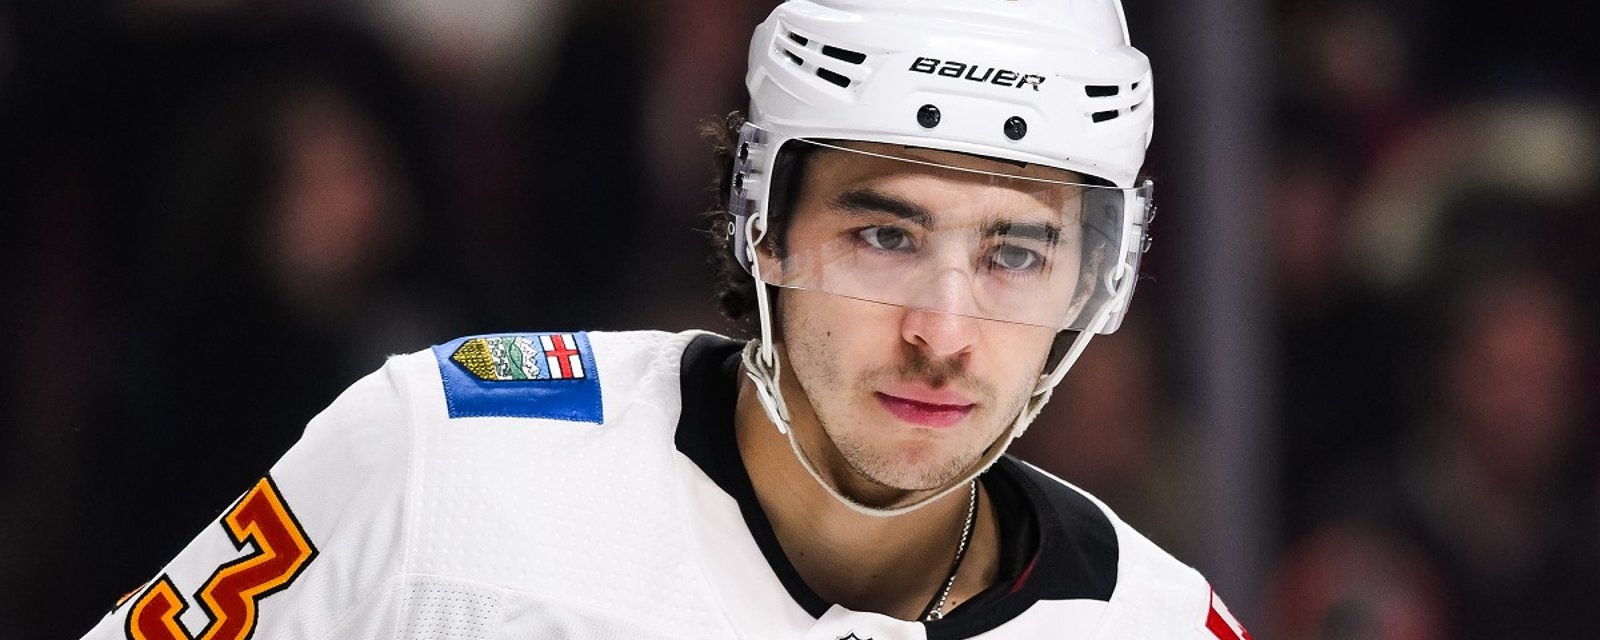 Gaudreau: I couldn't care less what they do as a team.